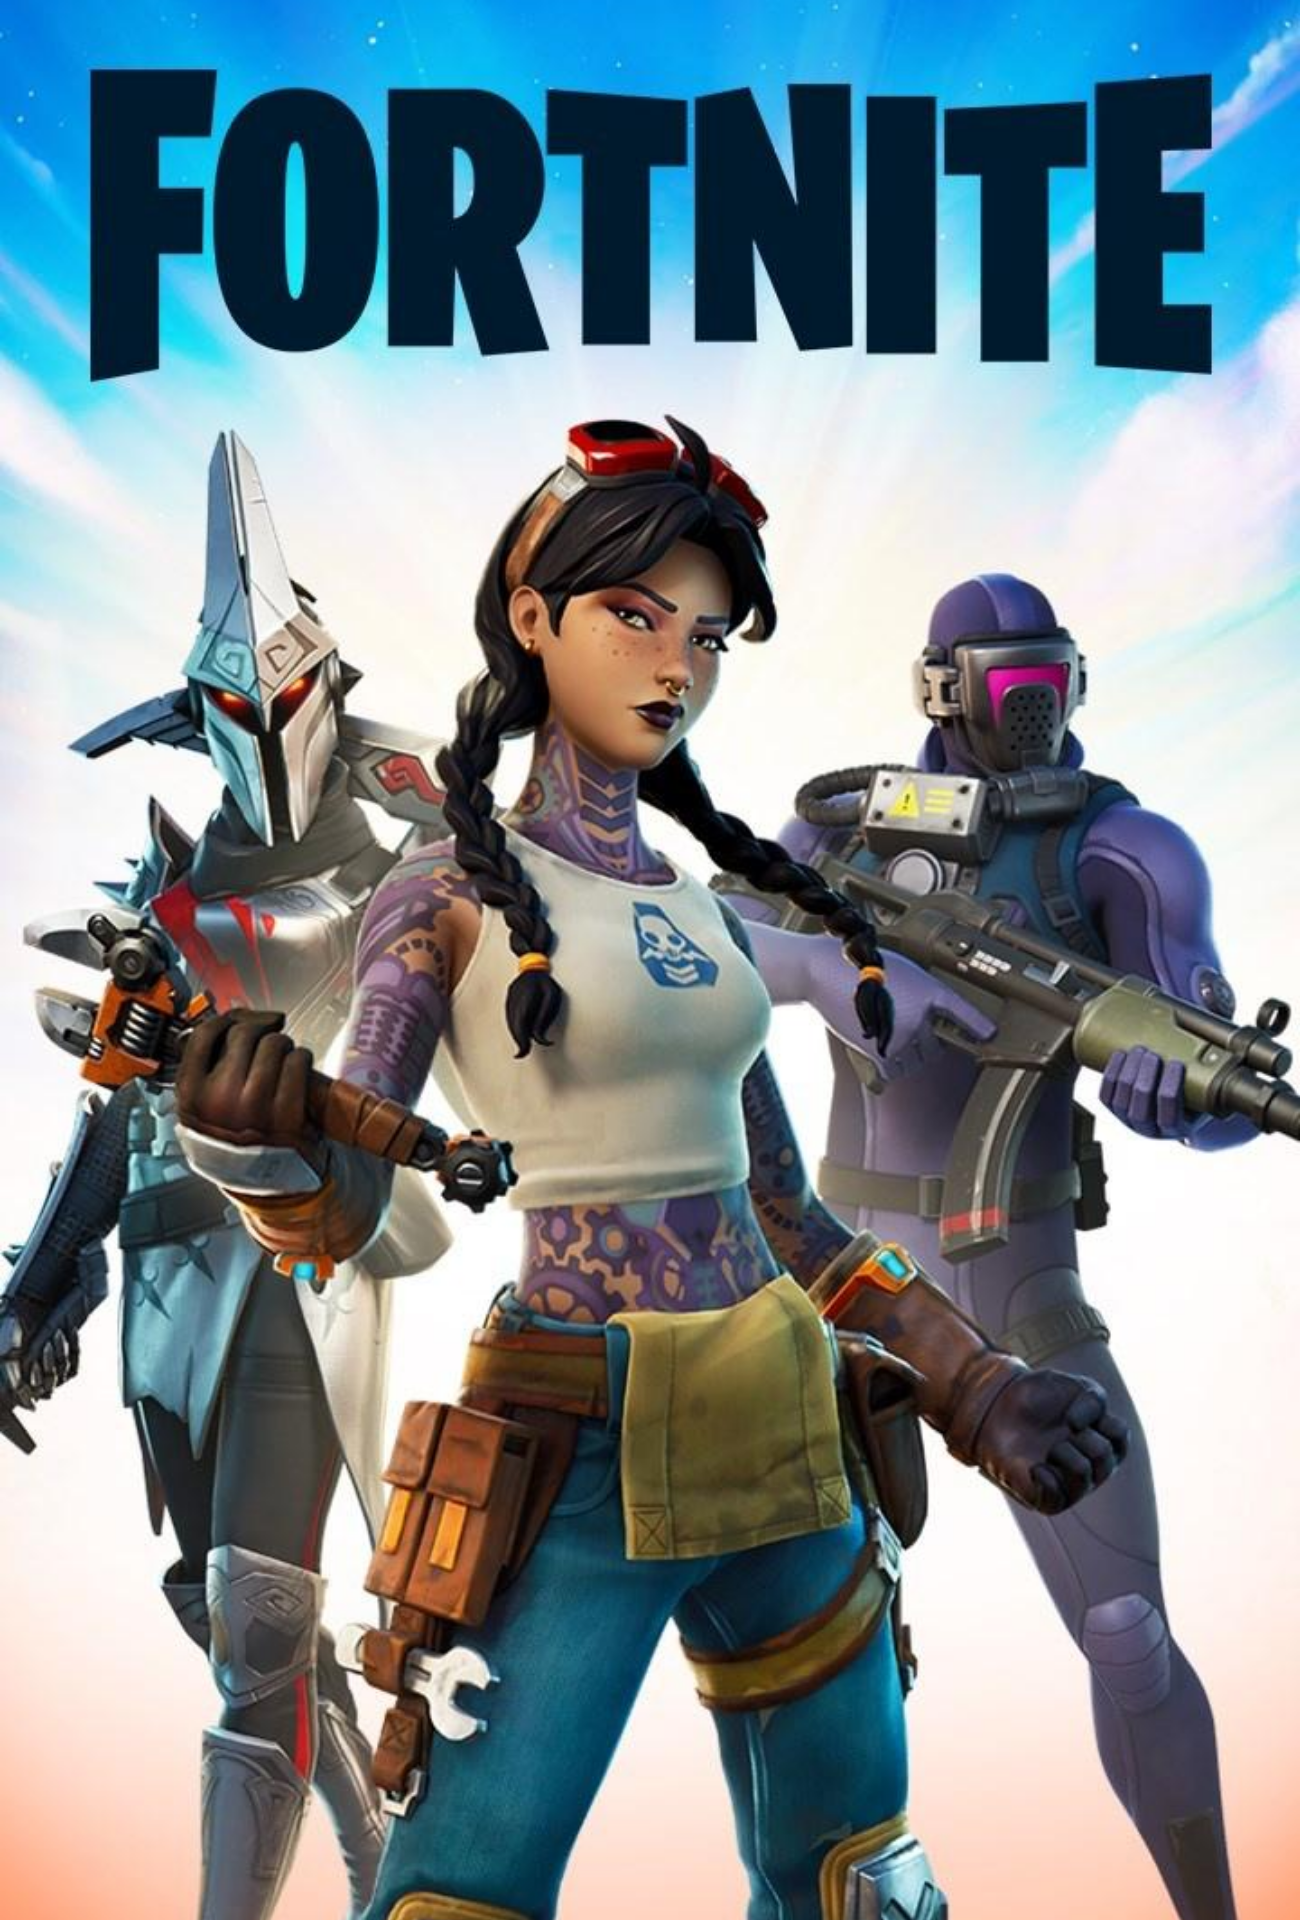 Introduction of Creative 2.0 in Fortnite Meets Mixed Reviews and Angst Over Disappearance of Classic LTMs